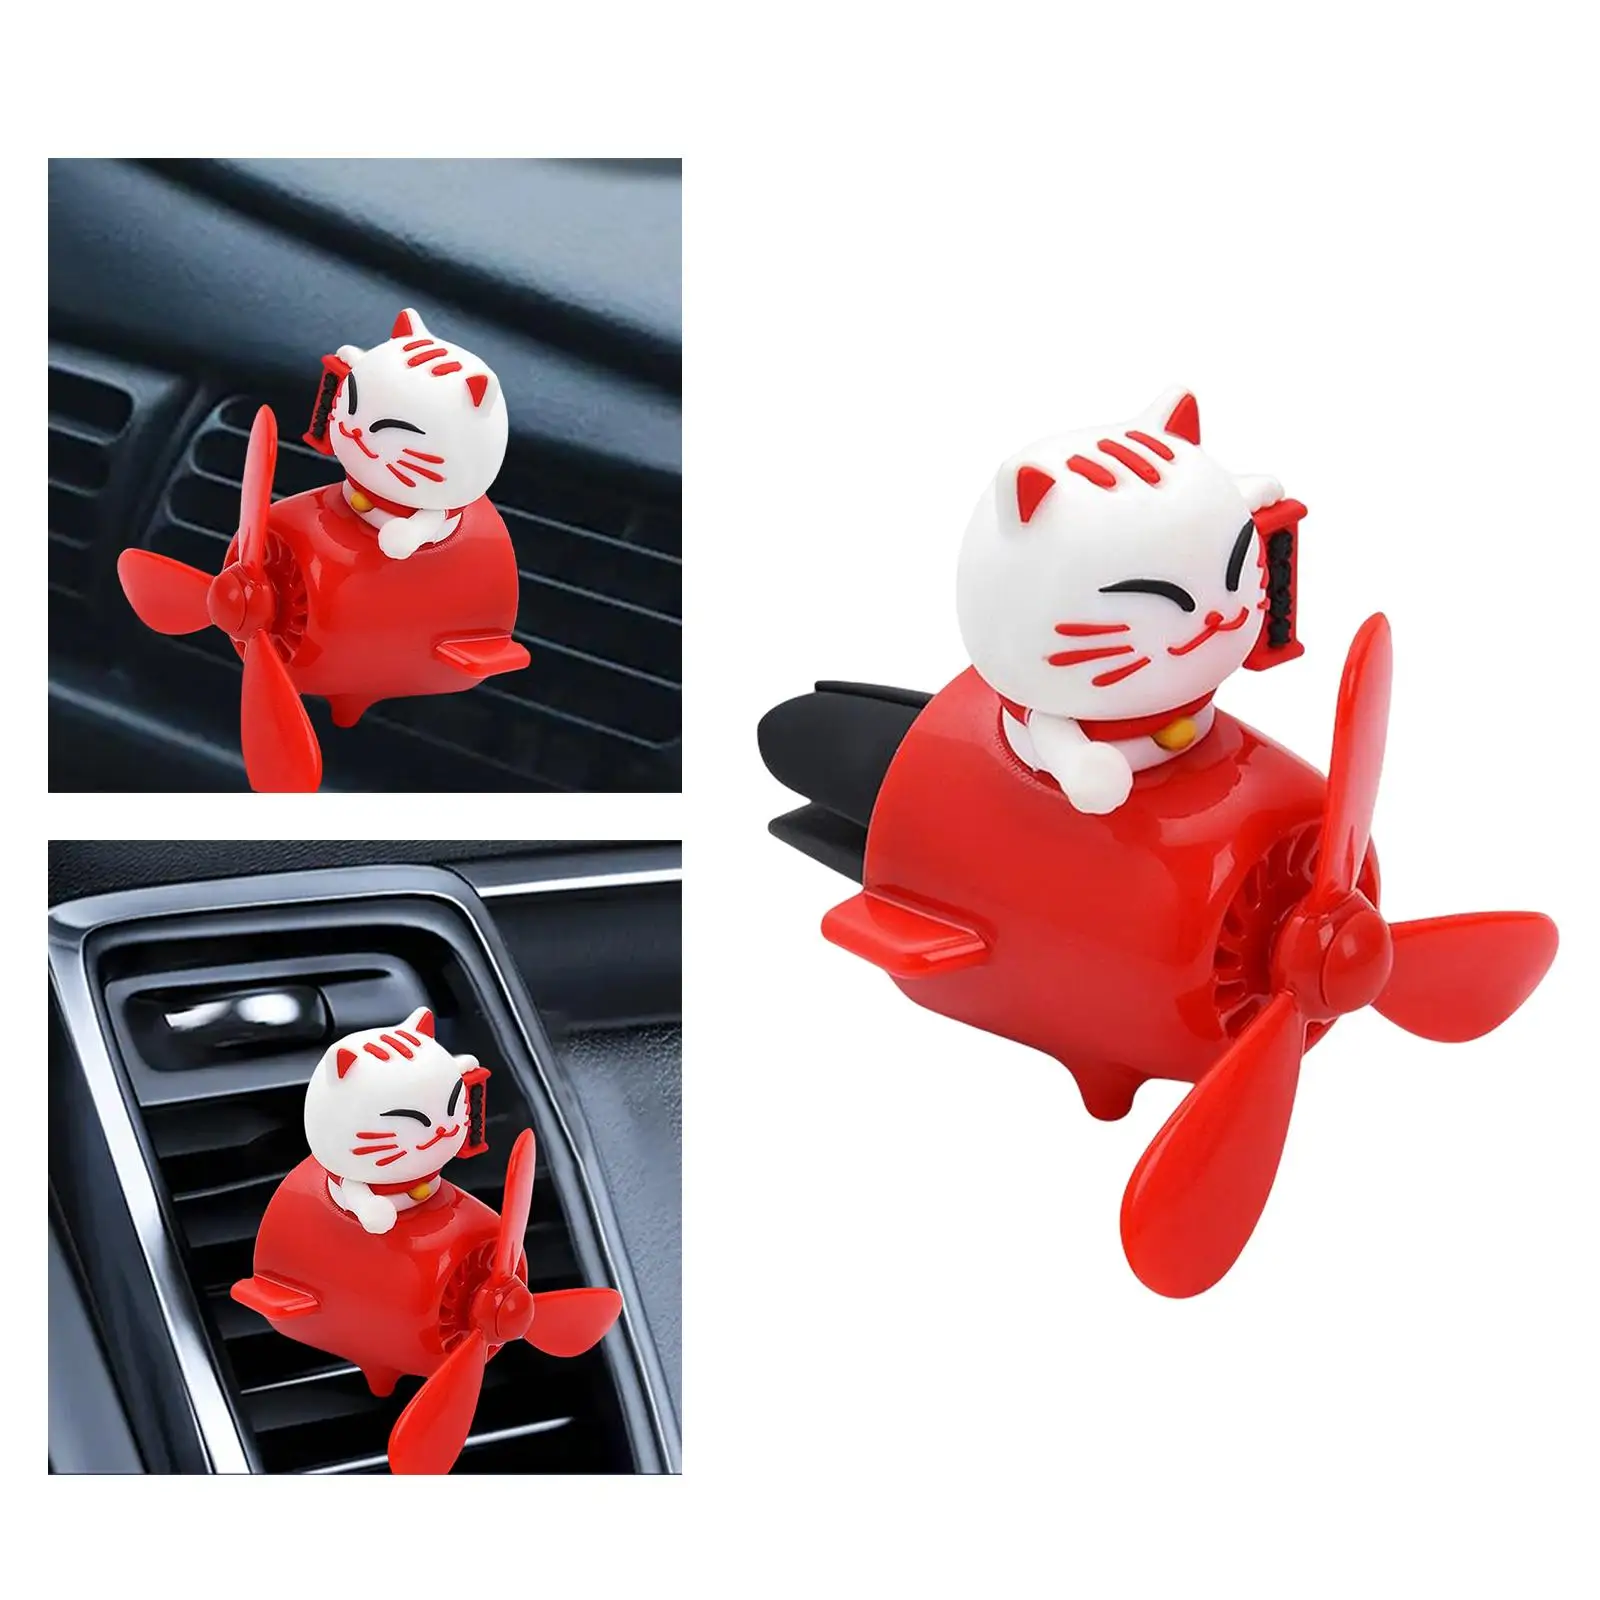 Cat Air Freshener Diffuser Travel Car Accessories Gift Rotating Propeller Air Vent Clips for Outdoor Automotive